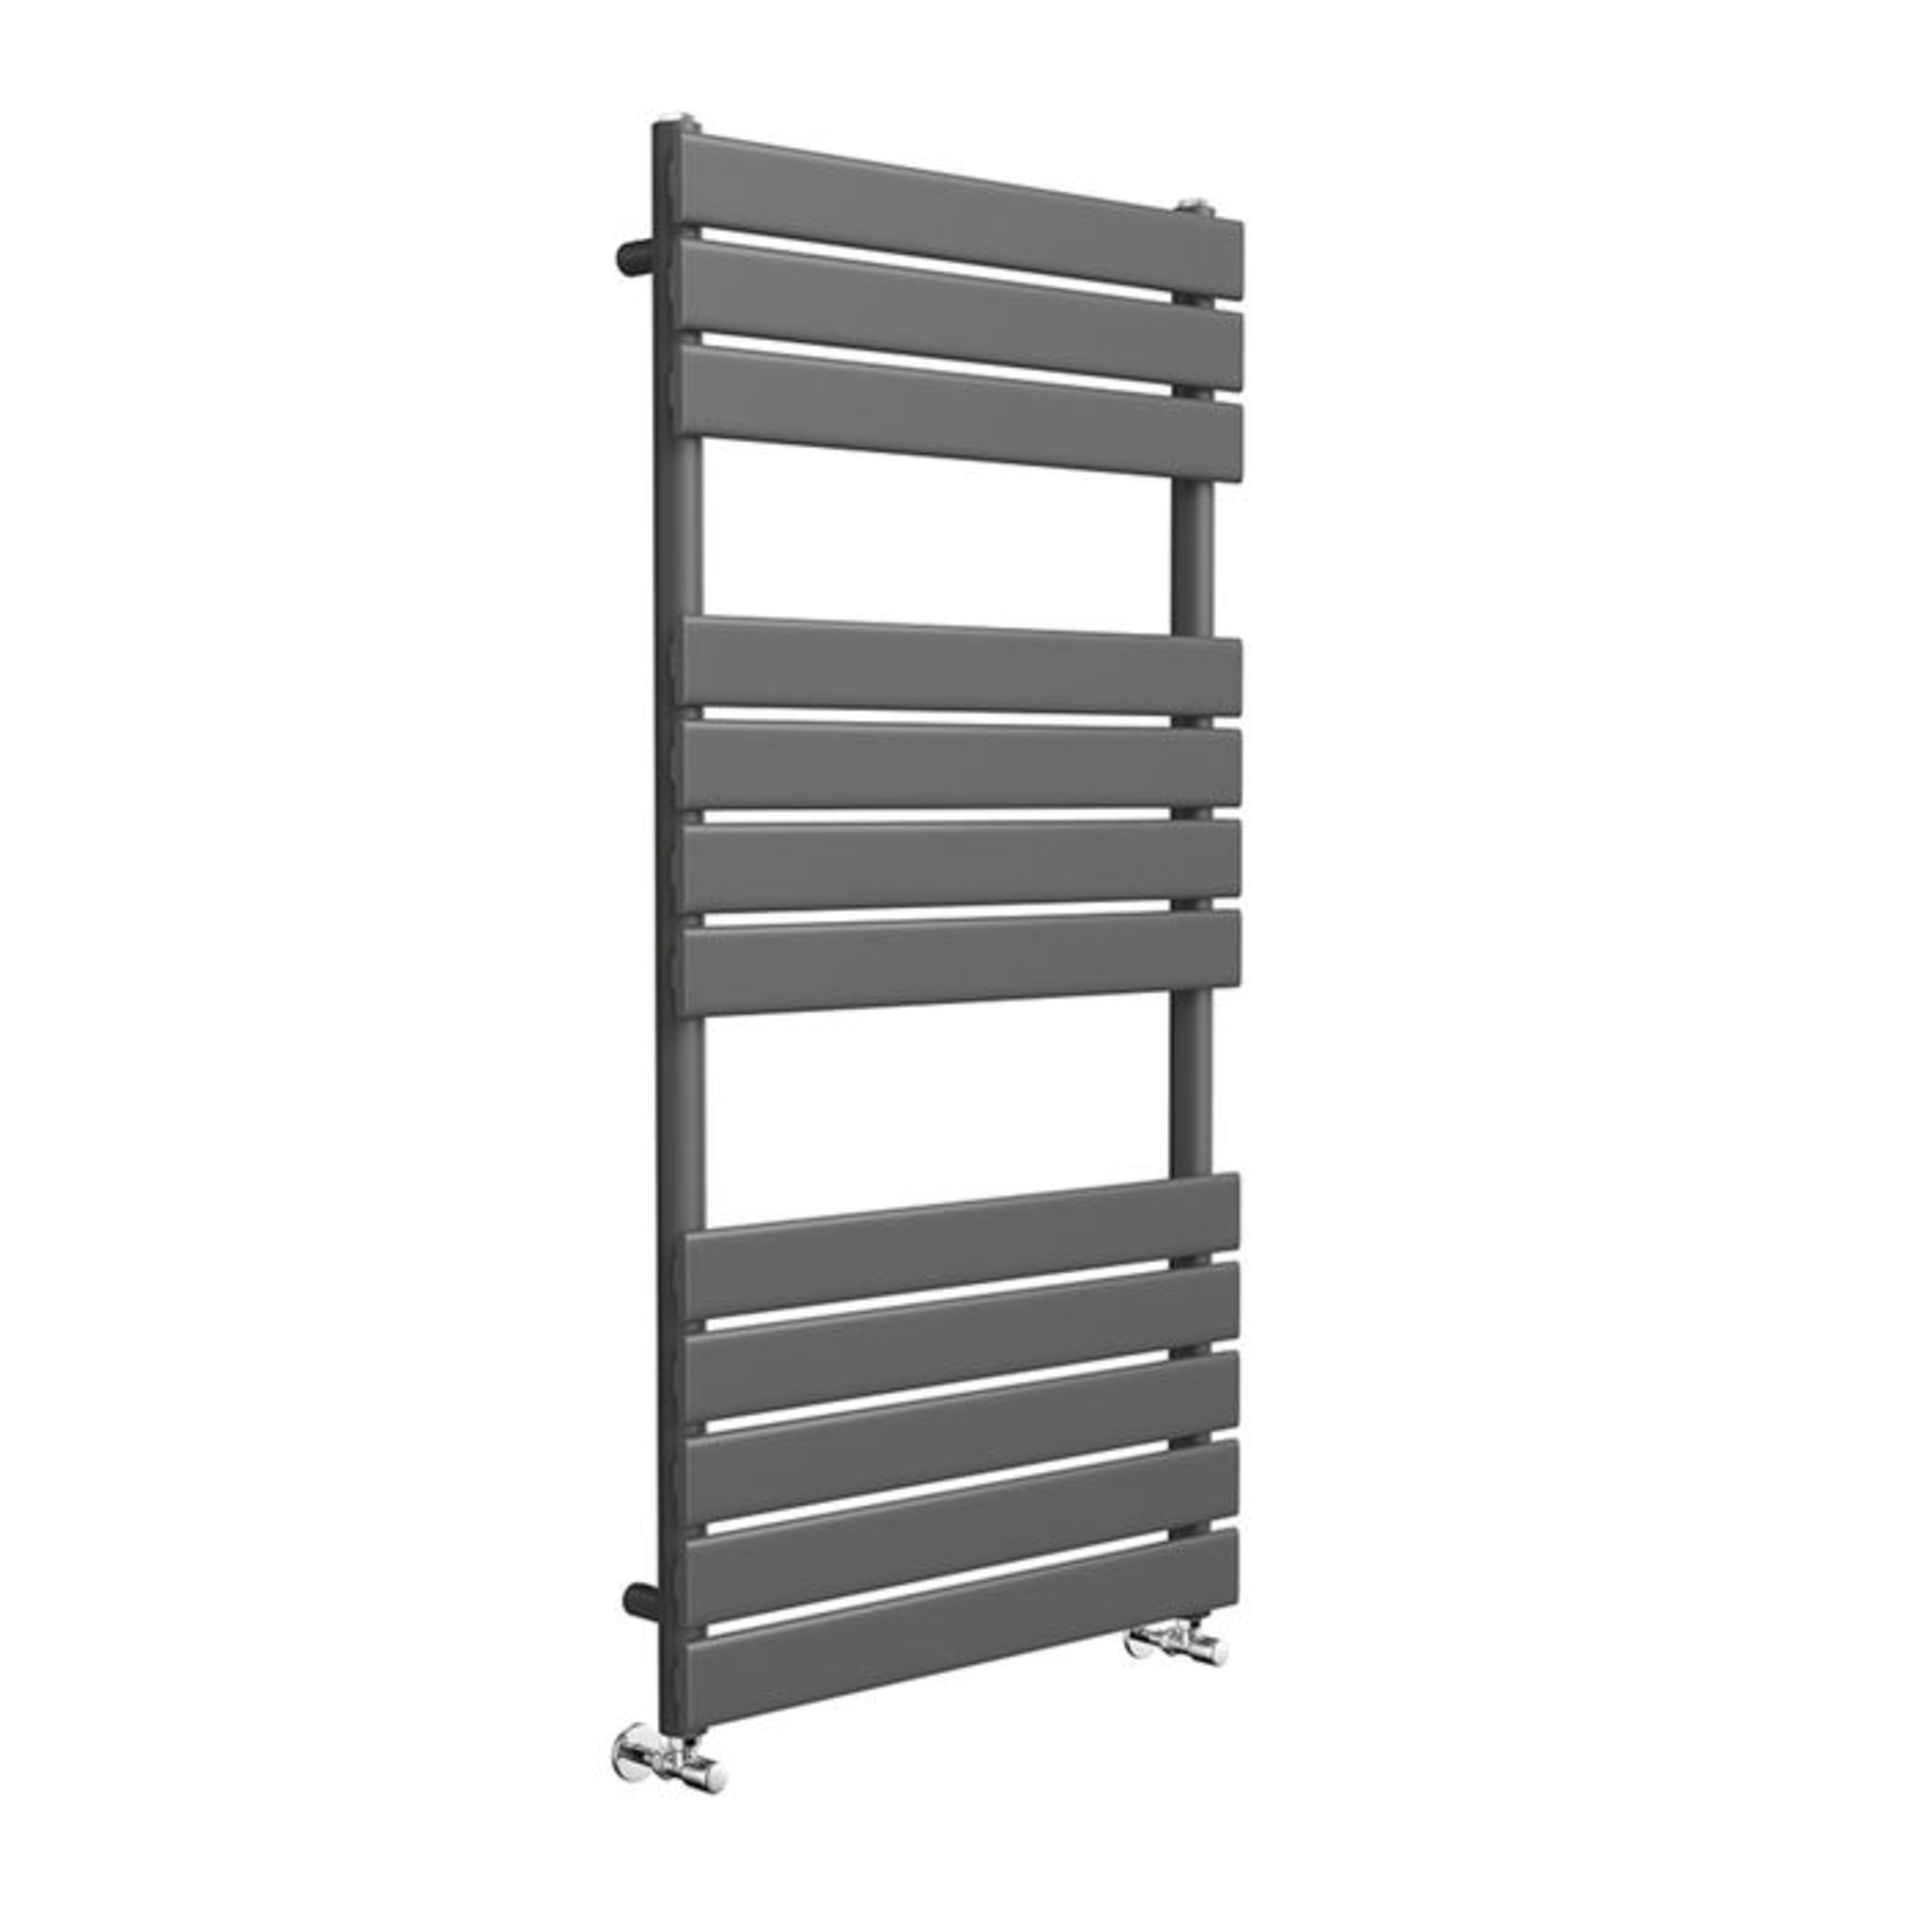 (XM28) 1200x600mm Anthracite Flat Panel Ladder Towel Radiator. Made with low carbon steel, - Image 3 of 3